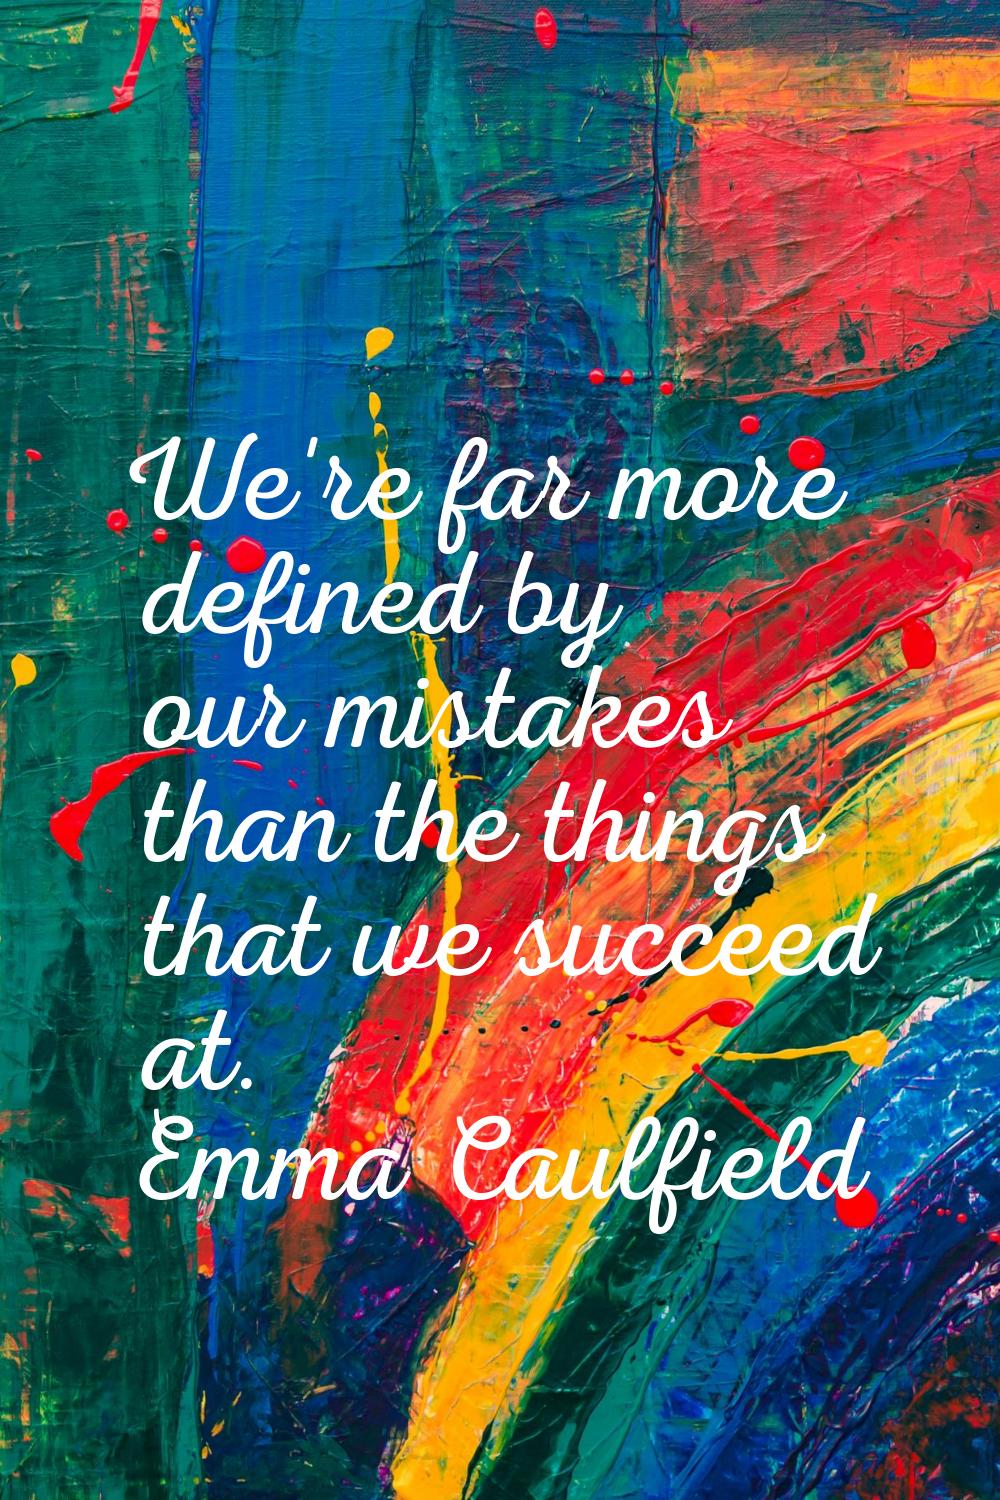 We're far more defined by our mistakes than the things that we succeed at.